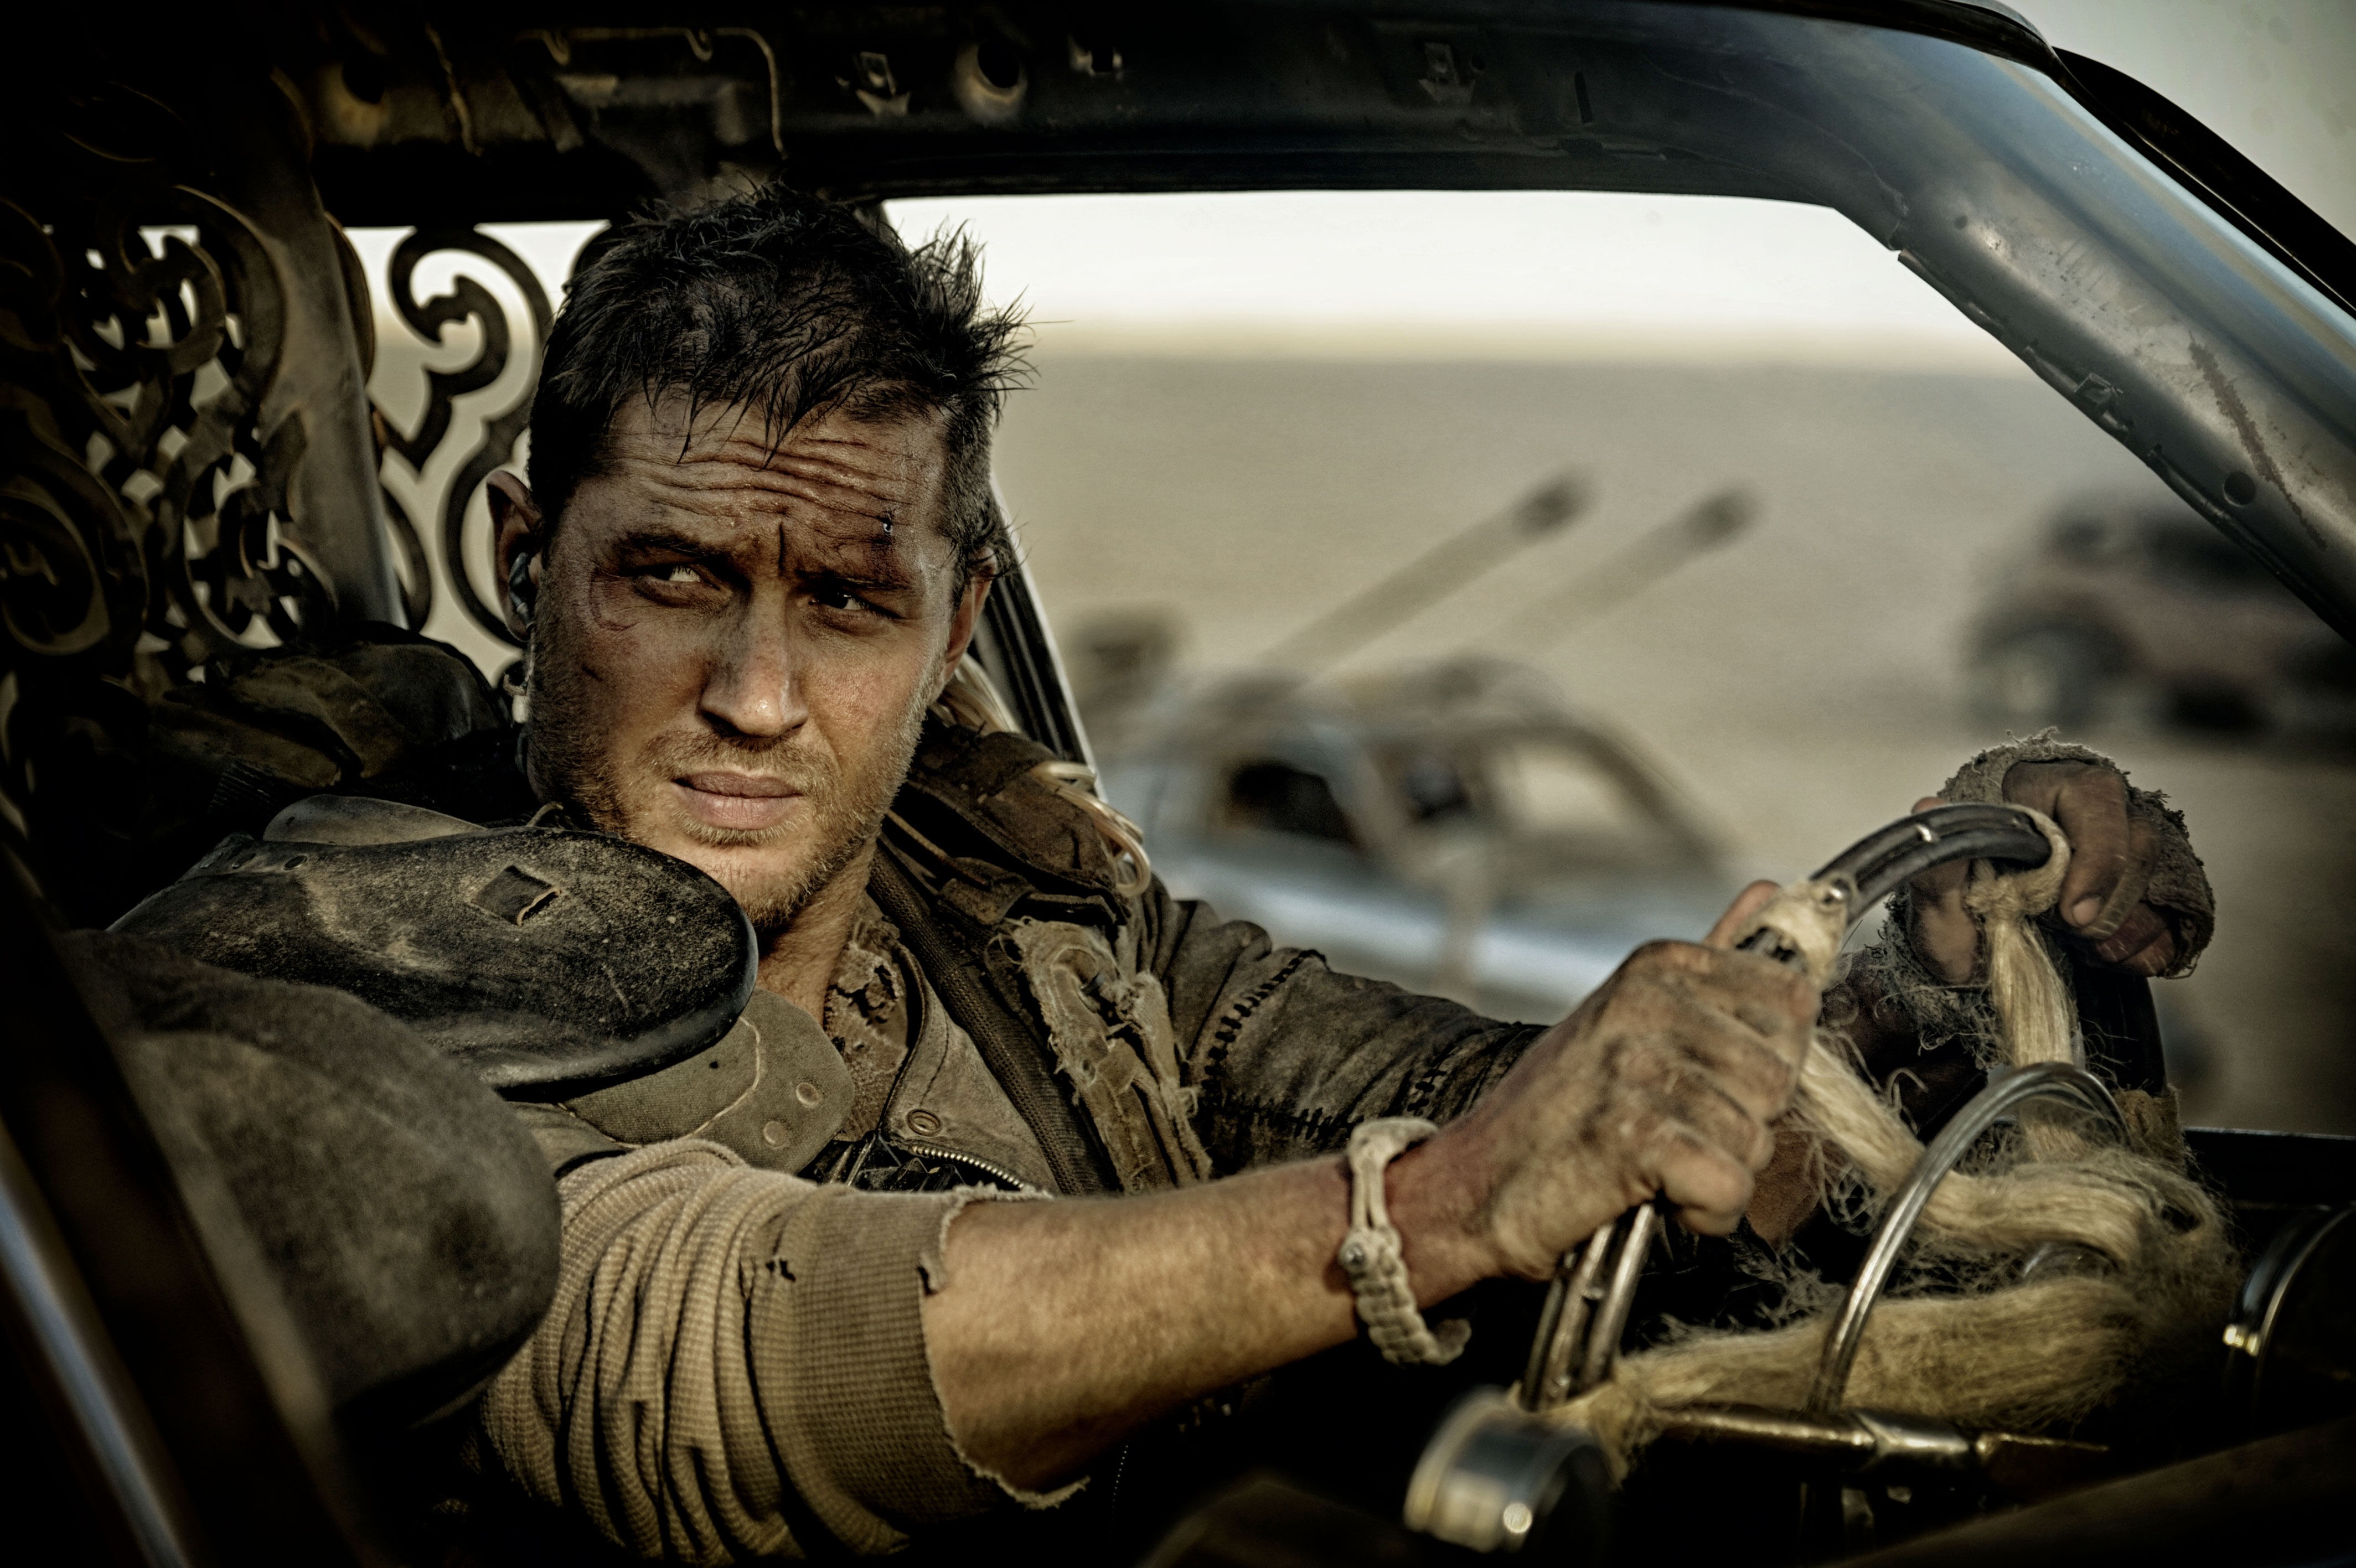 People 4256x2833 Tom Hardy Mad Max: Fury Road movies Mad Max men with cars car vehicle film stills men